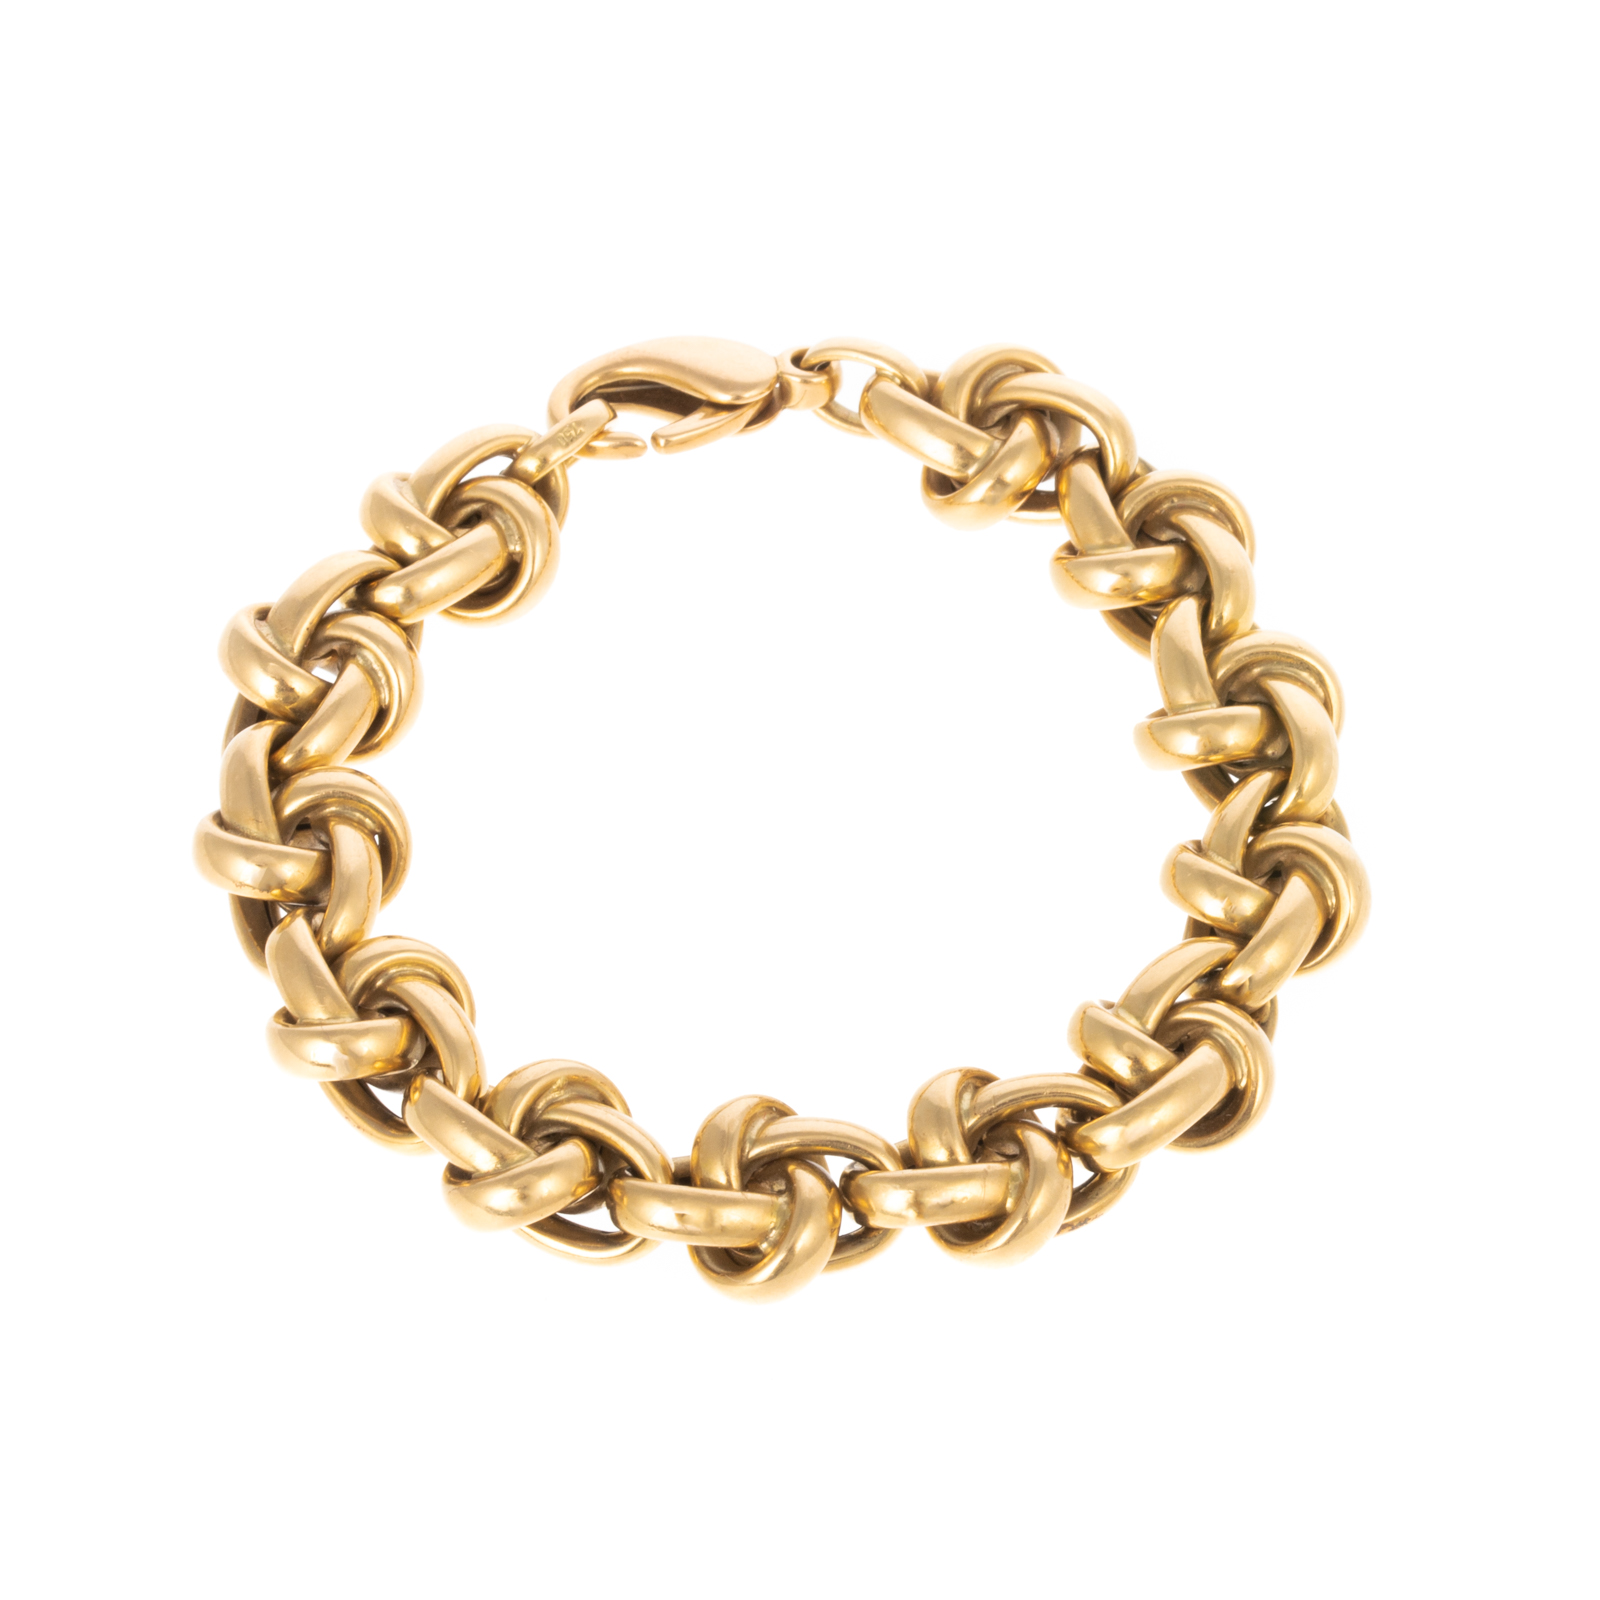 A SOLID 18K YELLOW GOLD KNOT BRACELET 338d3f